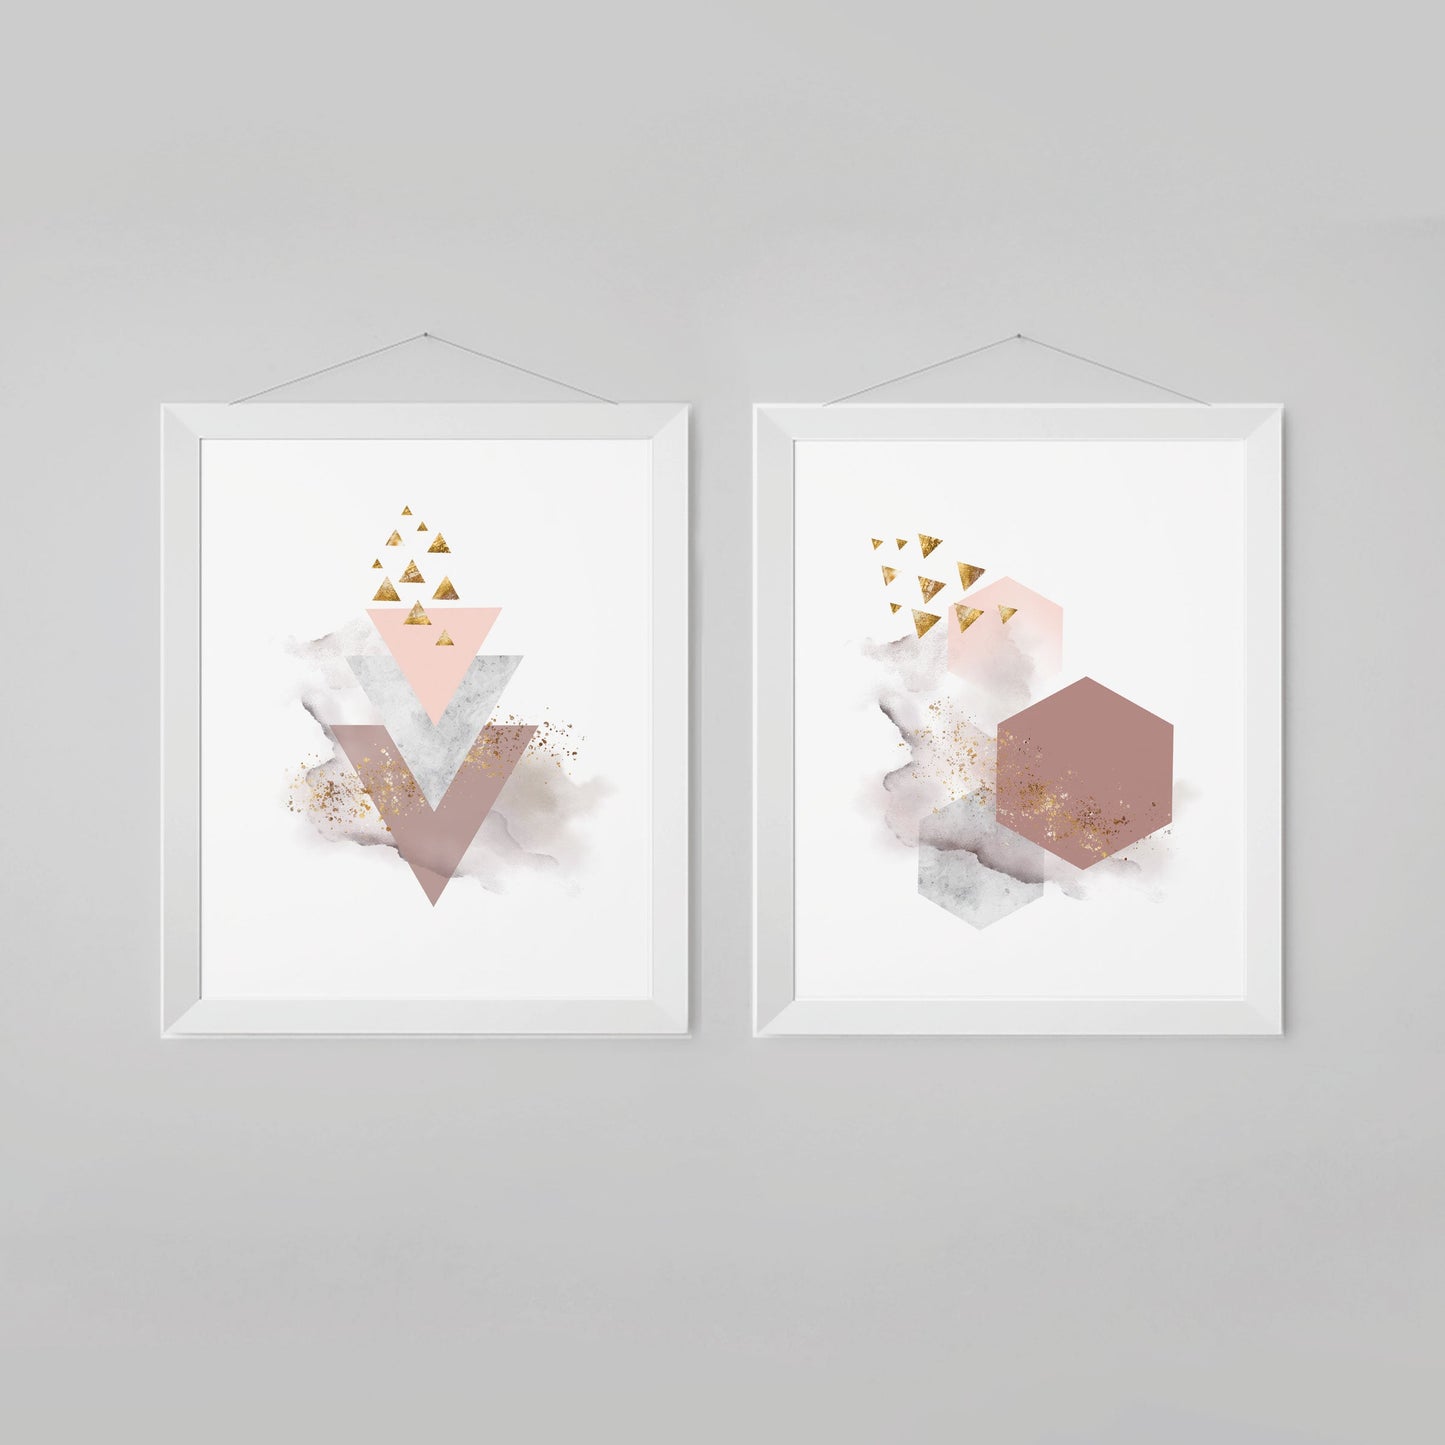 Abstract Shapes Marble Mauve Wall Art with Geometric